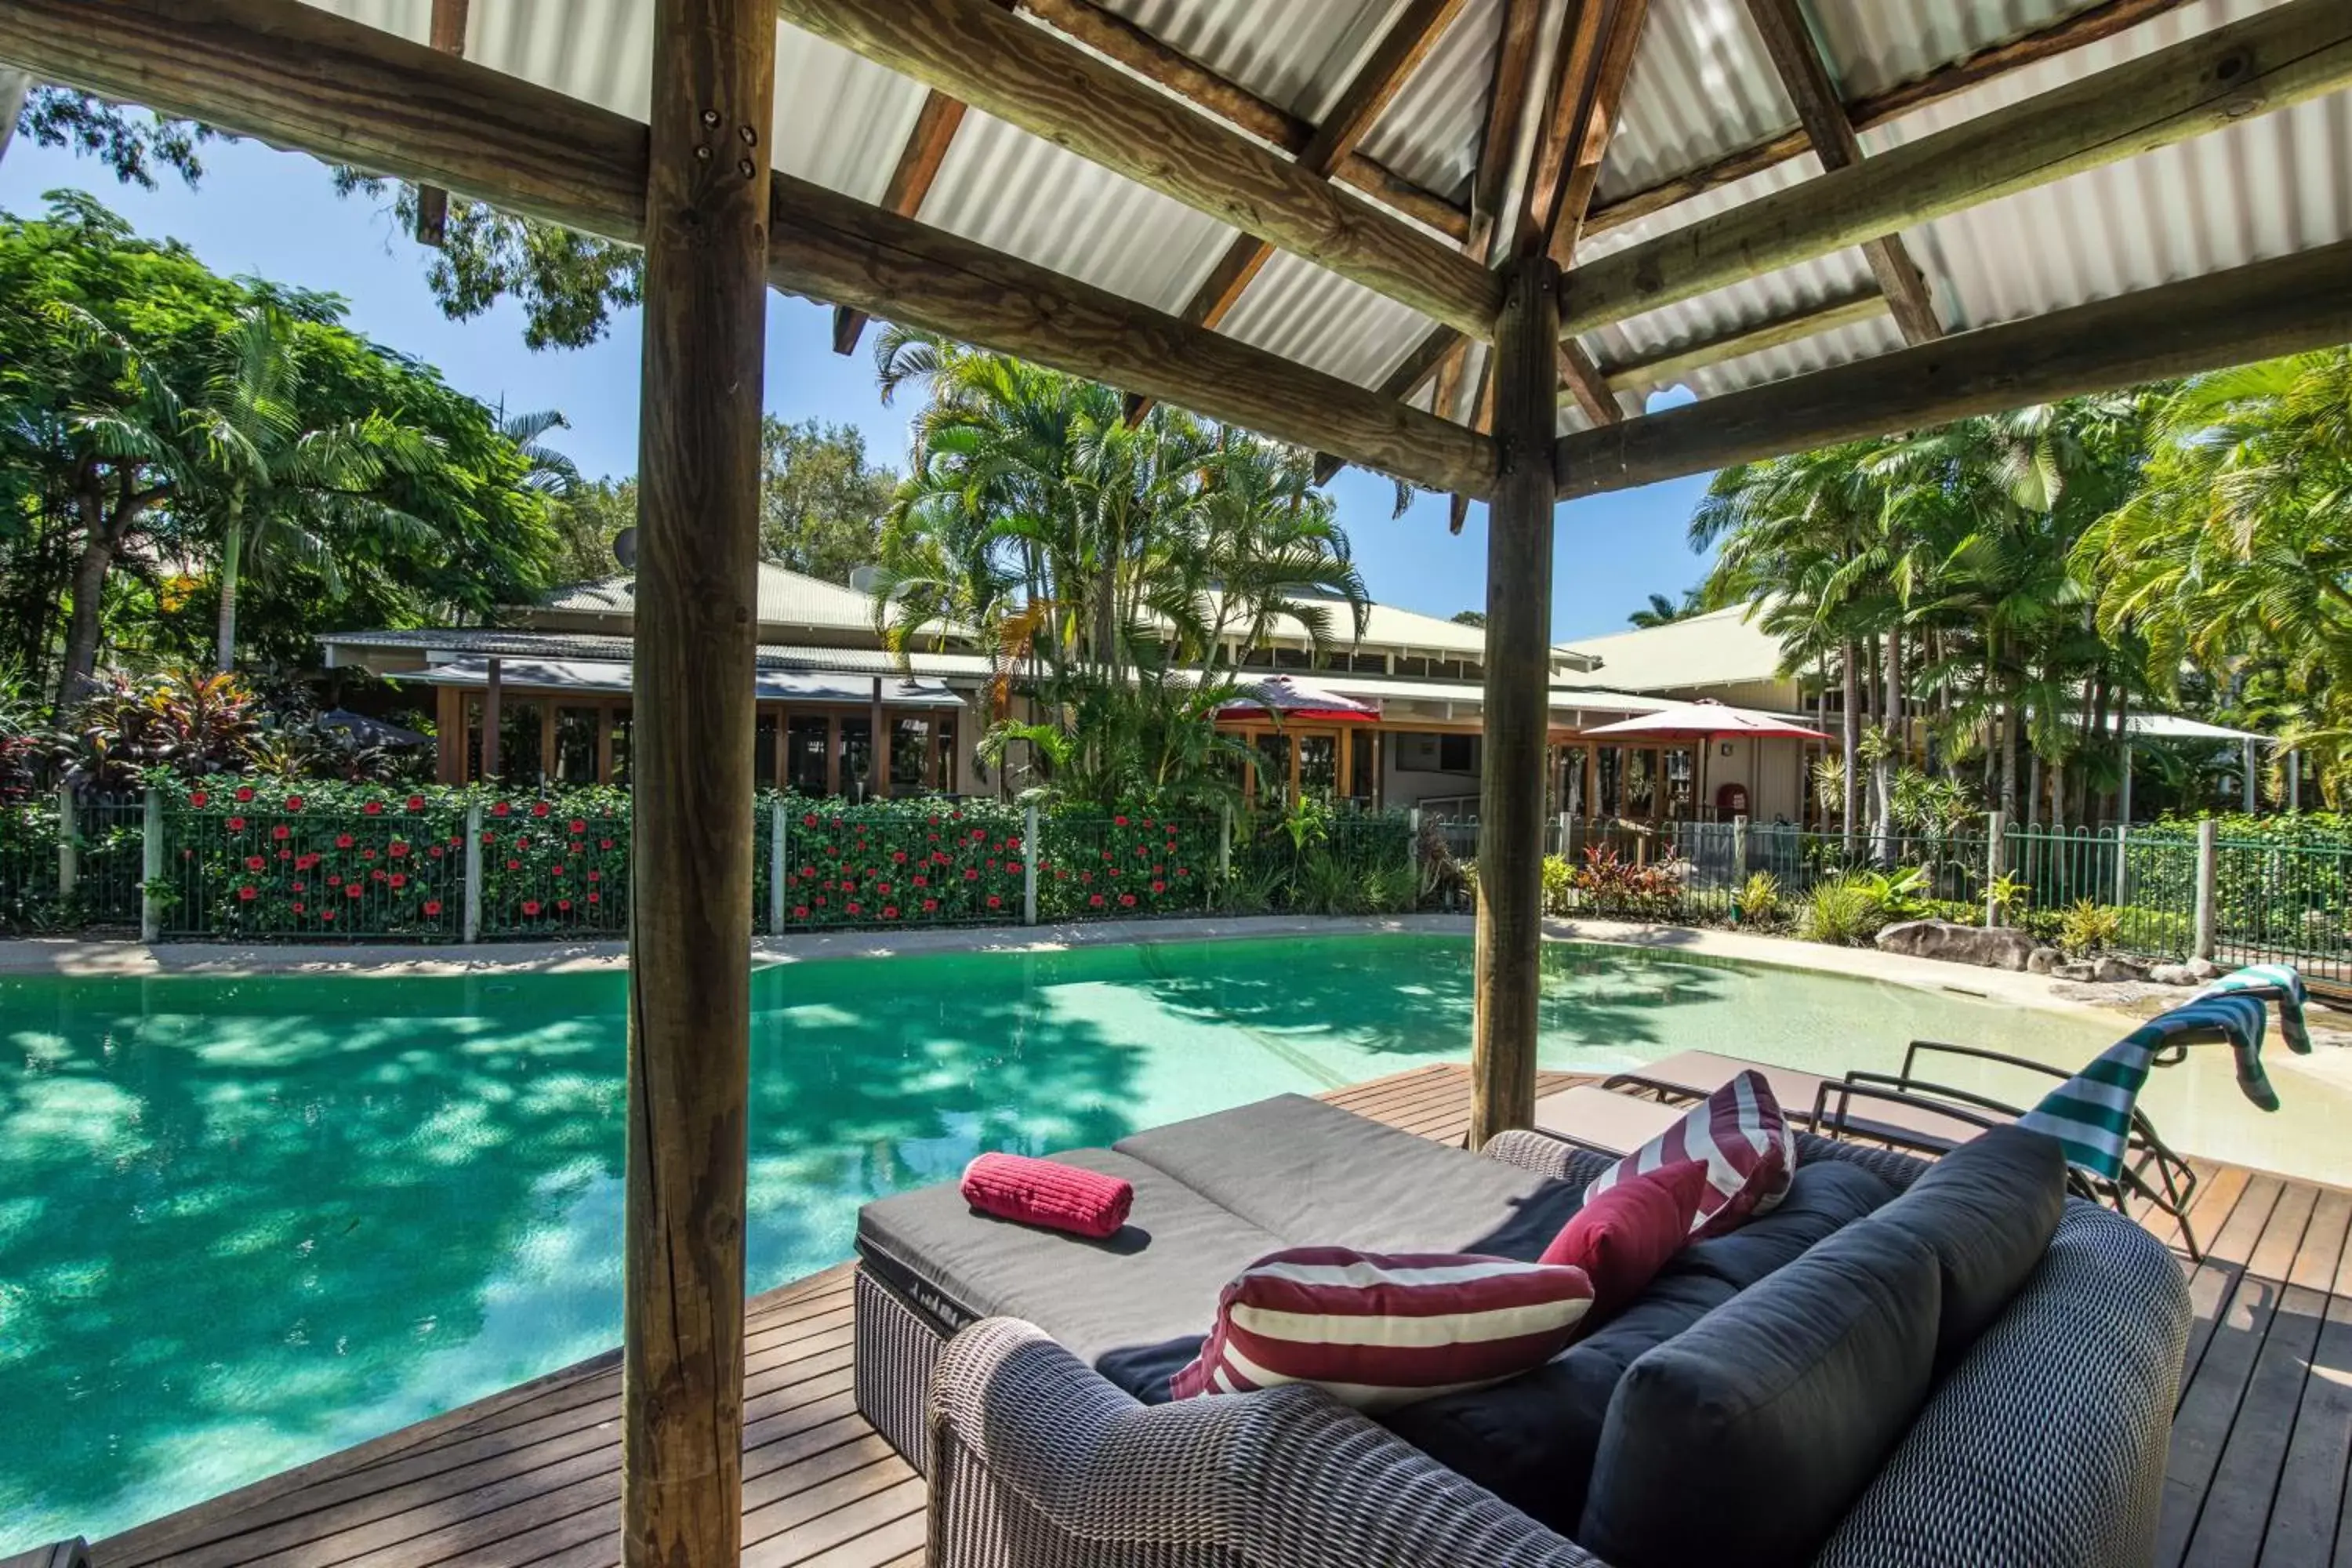 Swimming pool, Patio/Outdoor Area in South Pacific Resort & Spa Noosa